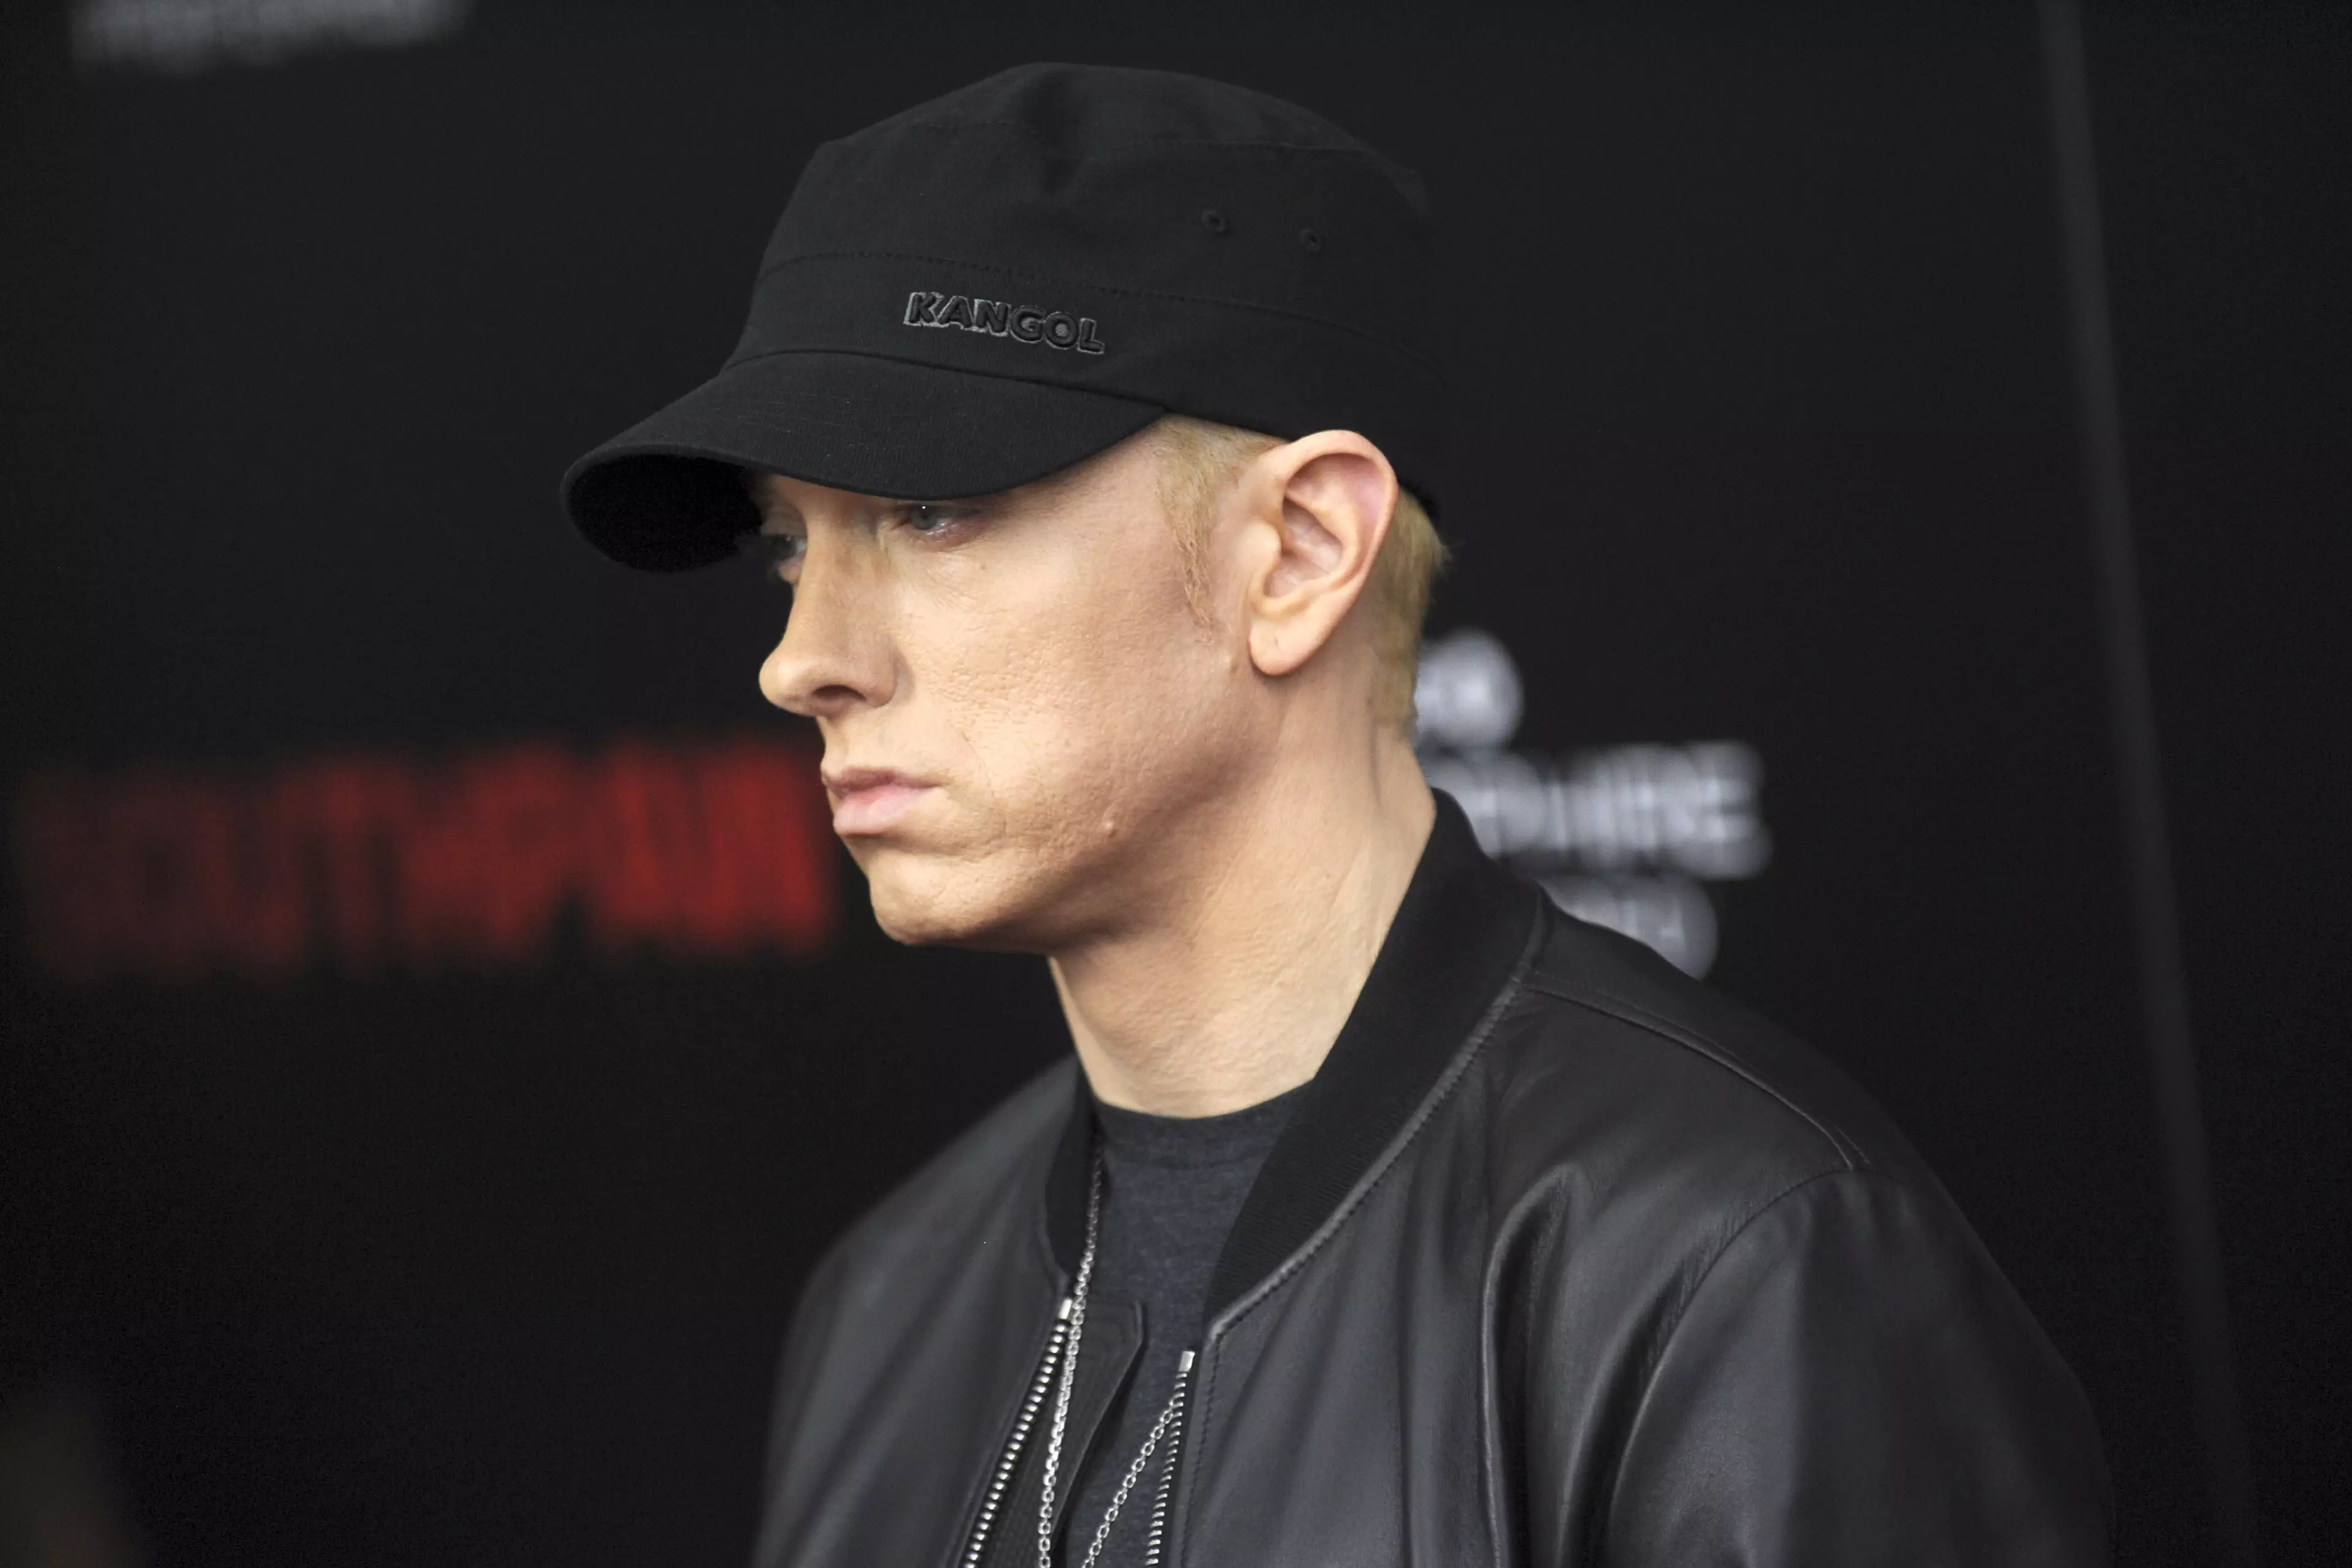 Perhaps if Eminem had replied to MGK's tweets their beef would never have unfolded.